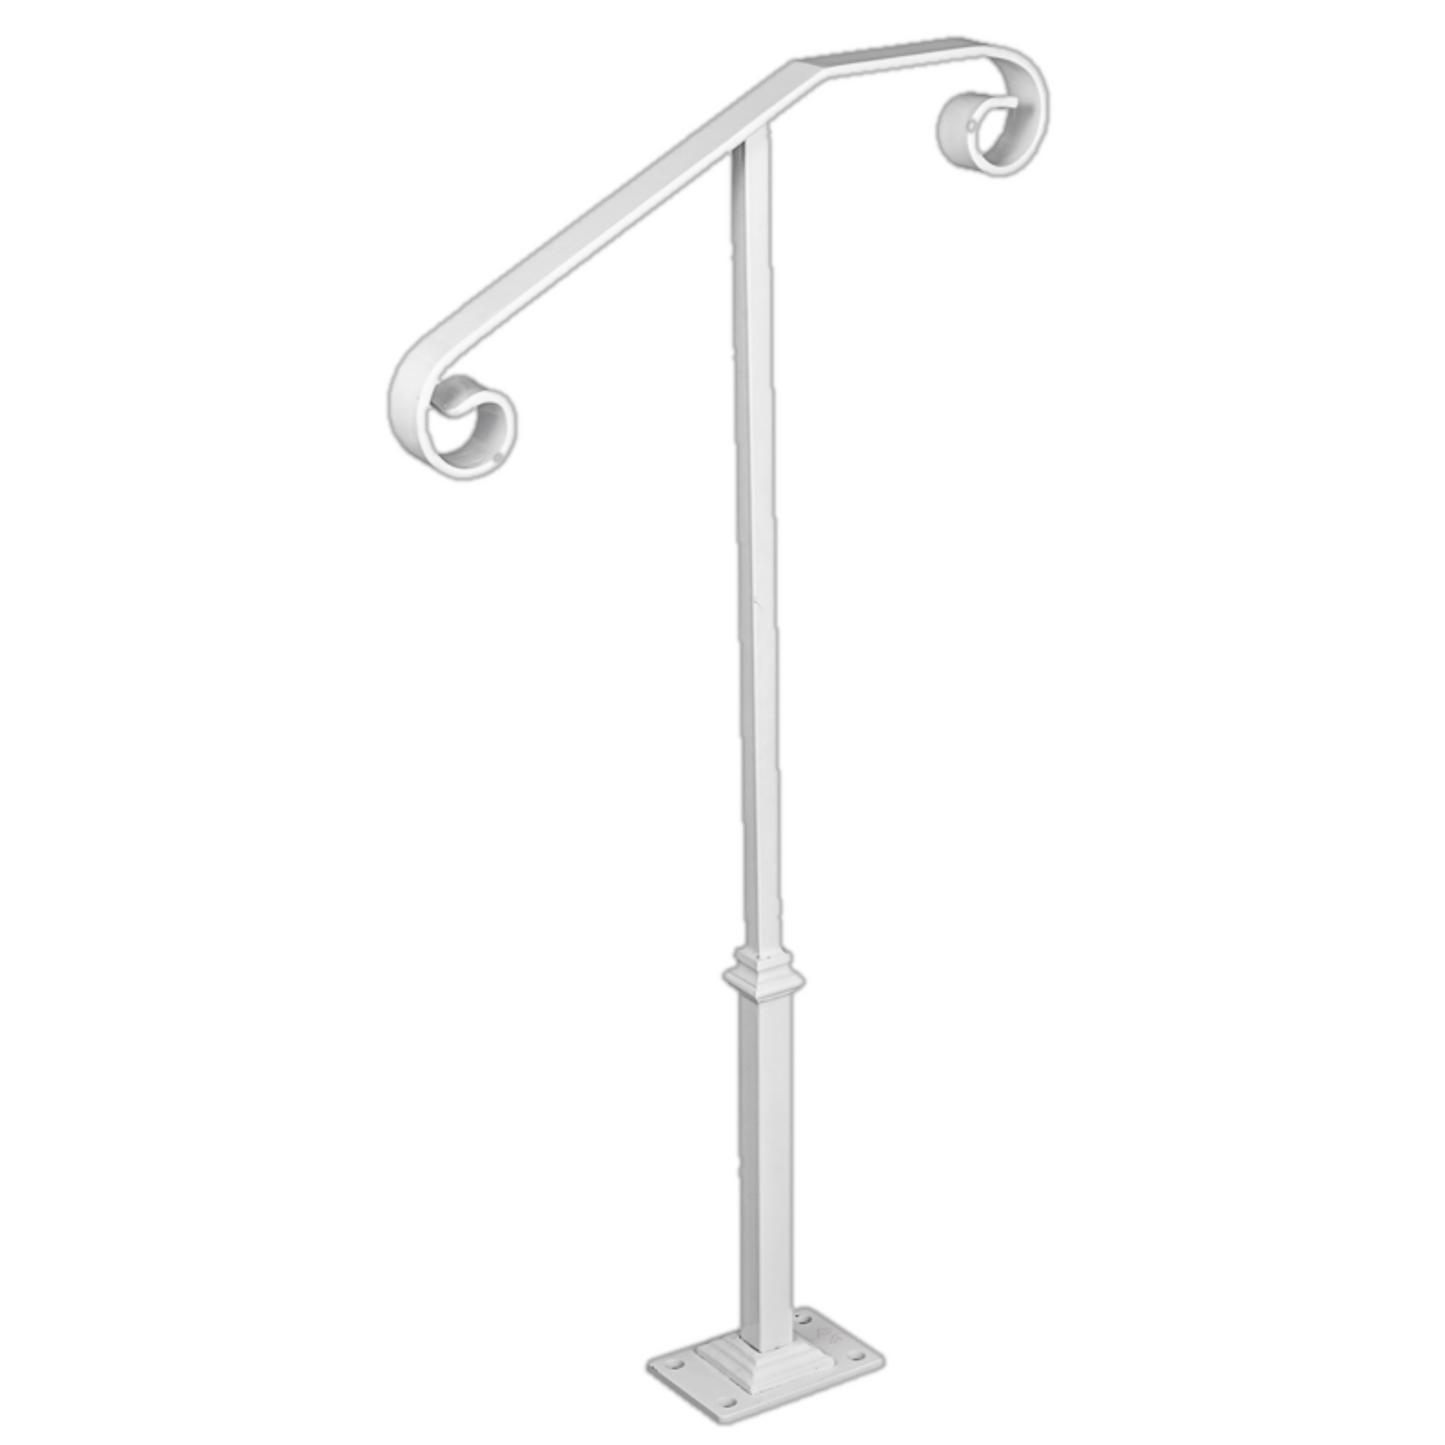 Bocce Court Safety Handrail | Ornamental